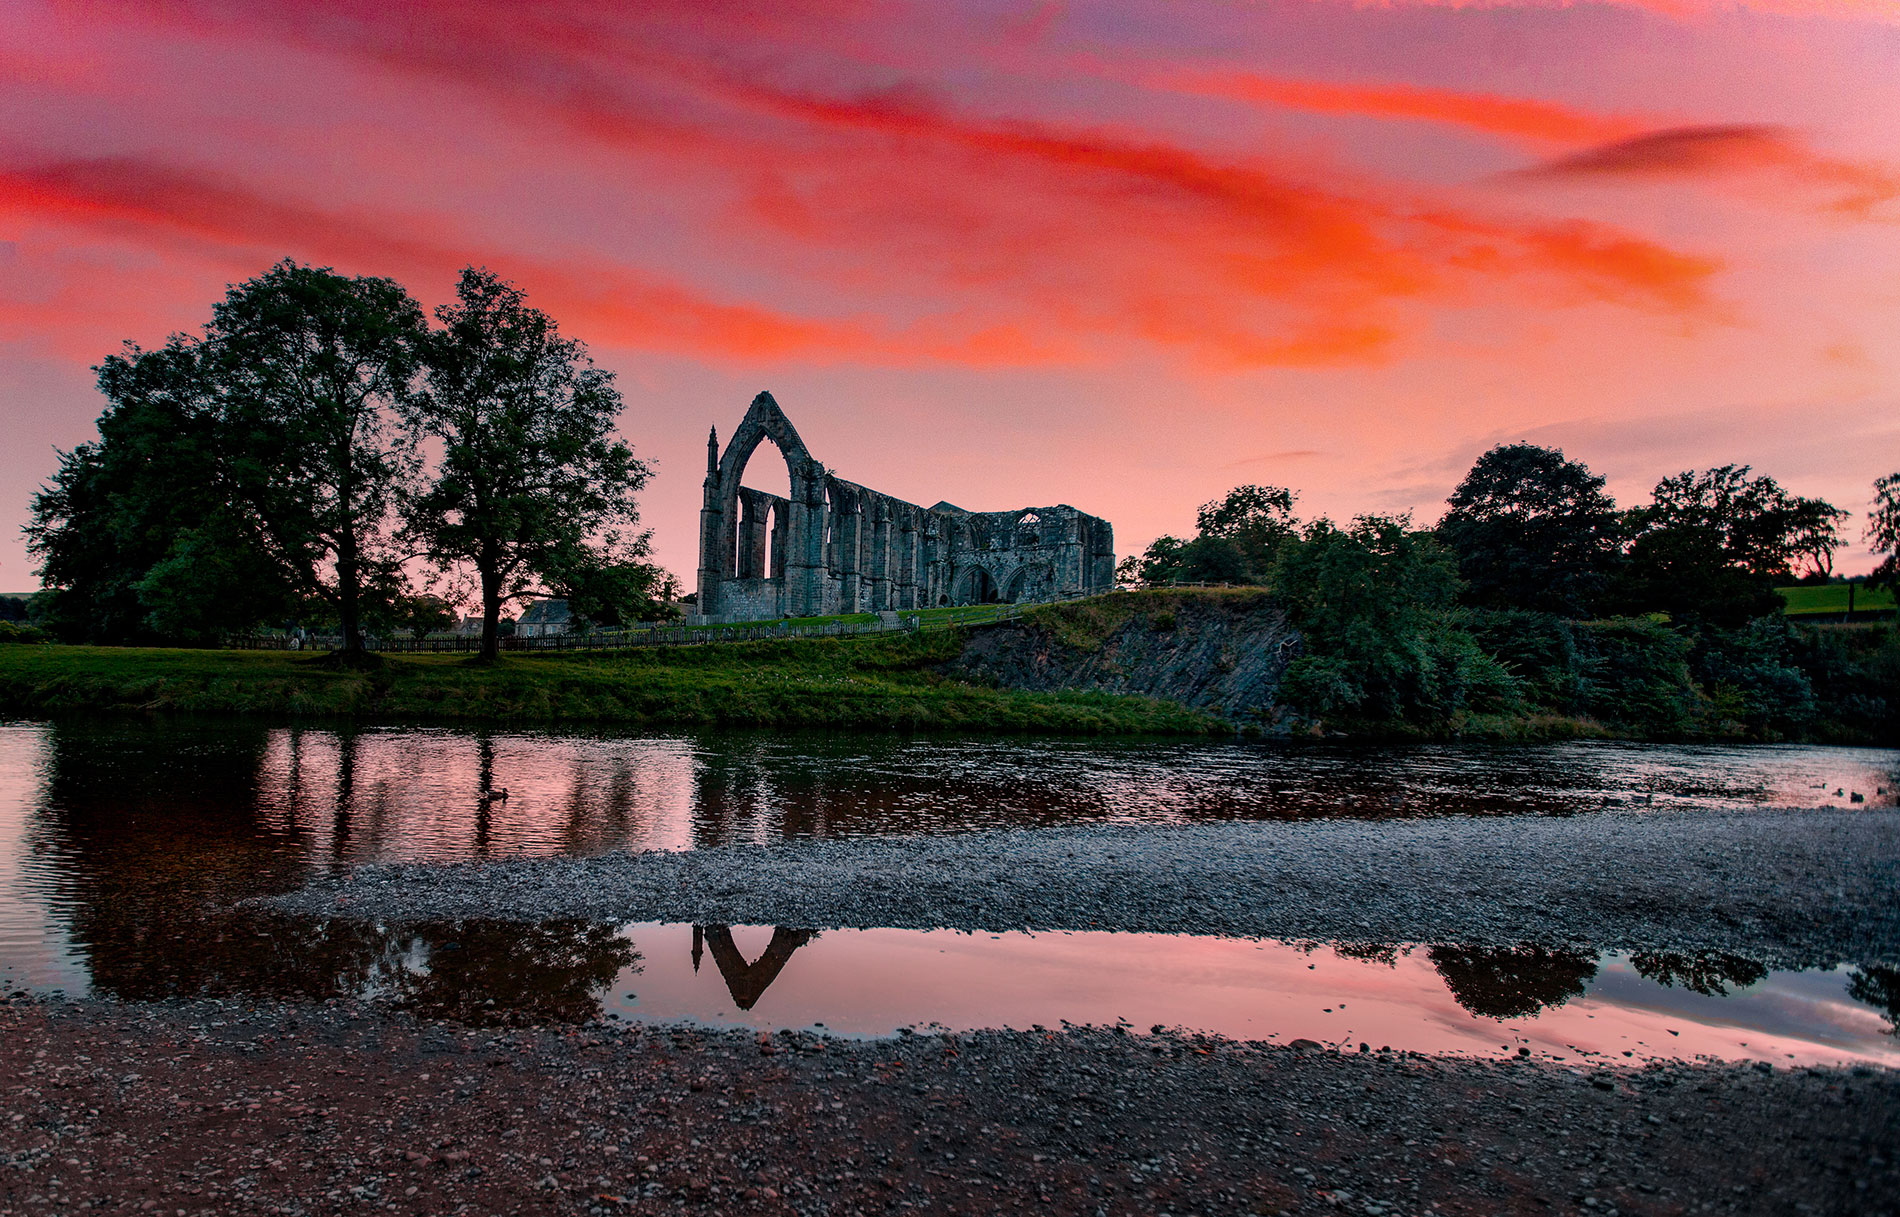 Bolton Abbey - Things to do in the Yorkshire Dales